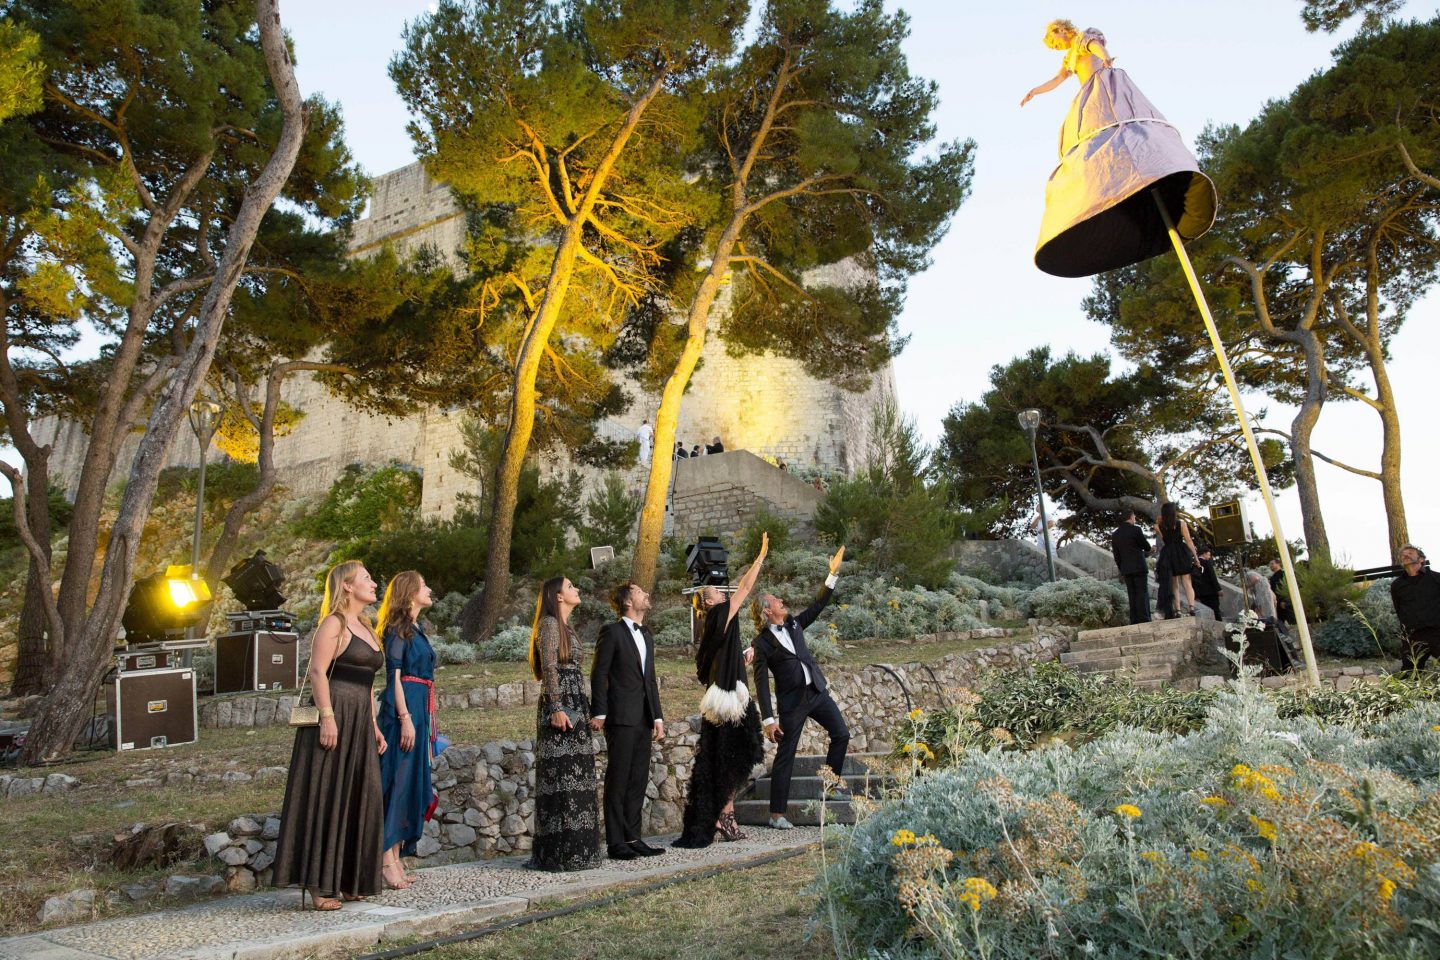 Guests and woman on stilts on their way to evening dinner at Fort Lovrijenac at this Dubrovnik wedding in Croatia | Photo by Robert Fairer